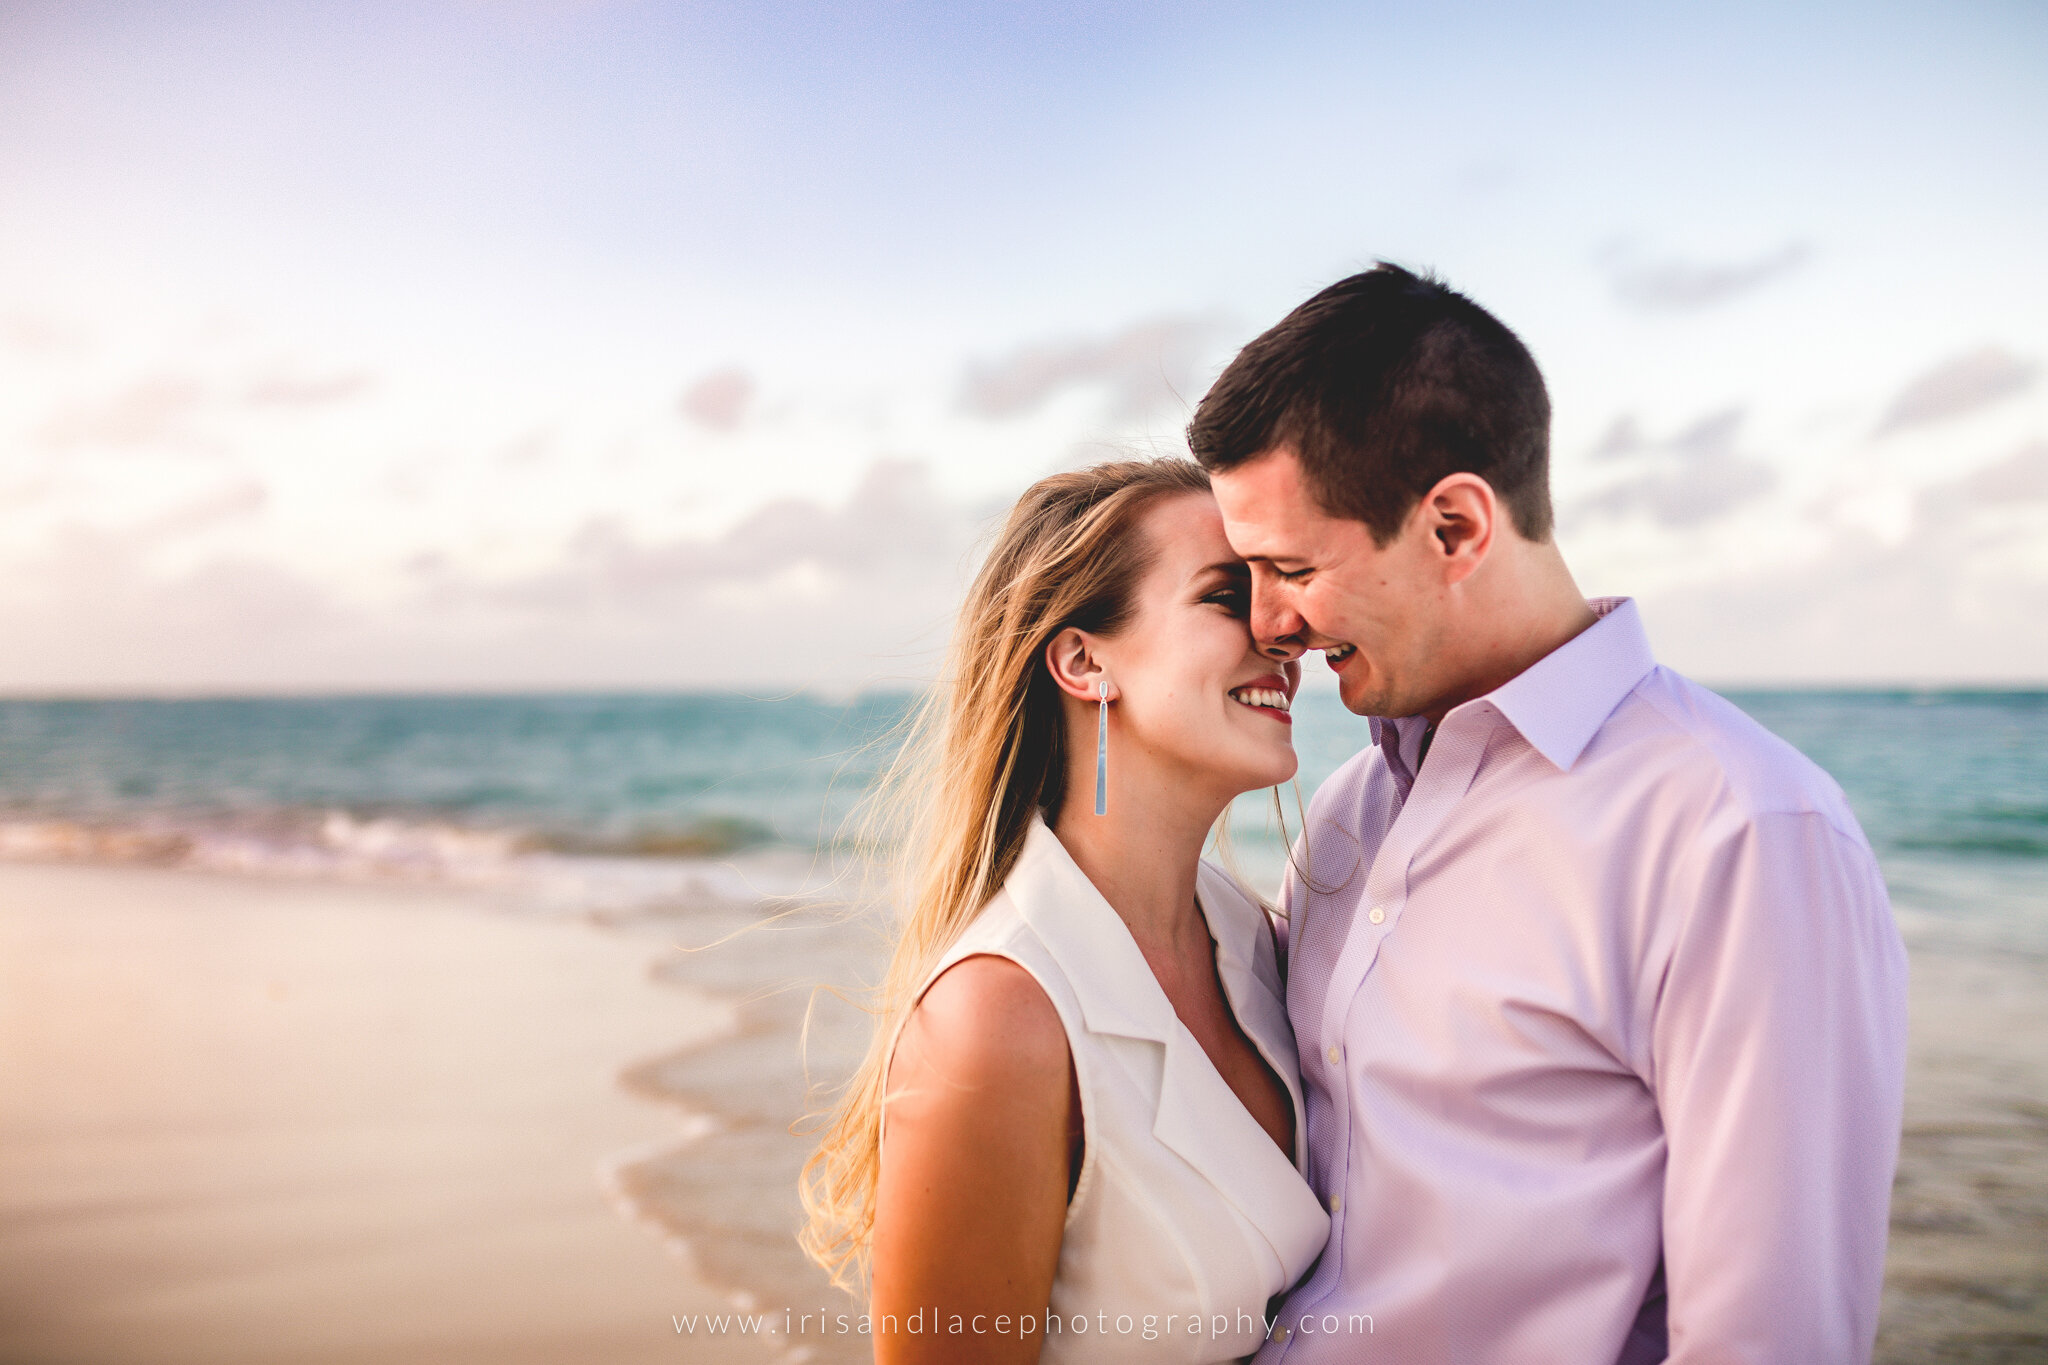 Beach engagement photos |  Iris and Lace Photography